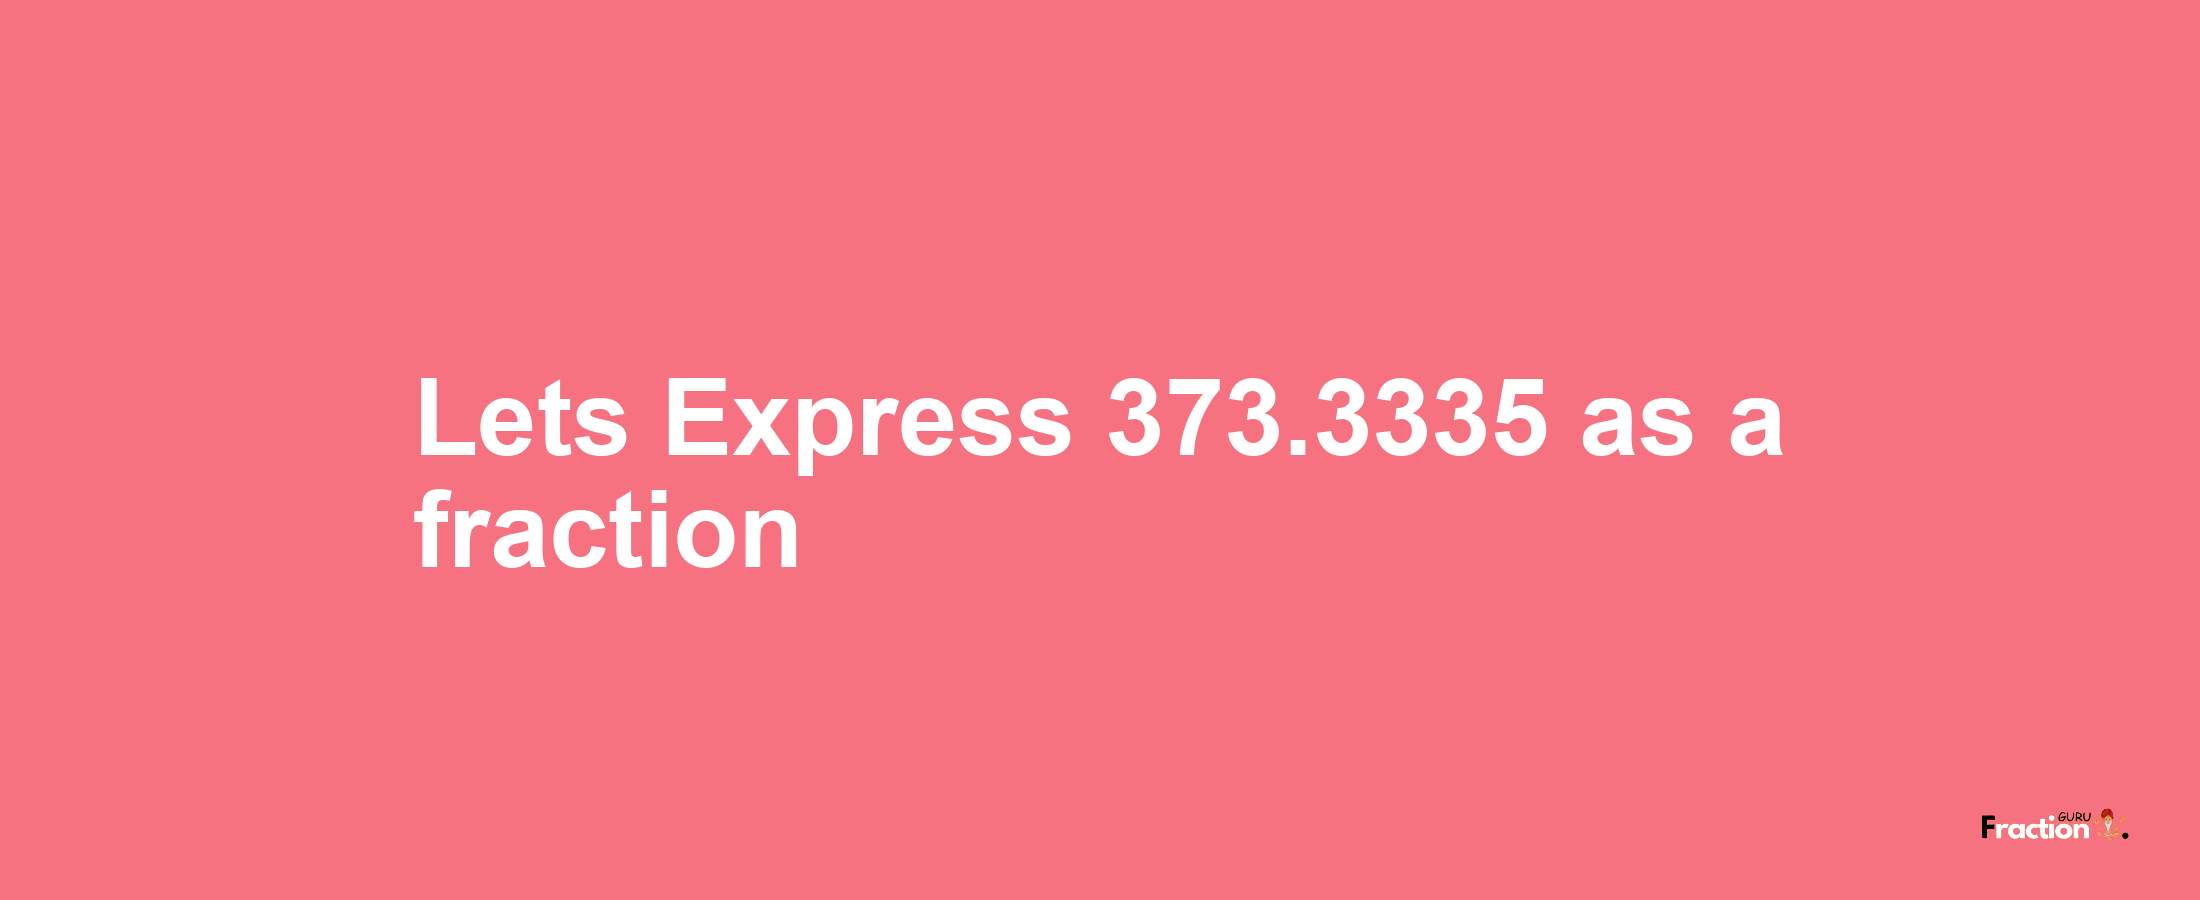 Lets Express 373.3335 as afraction